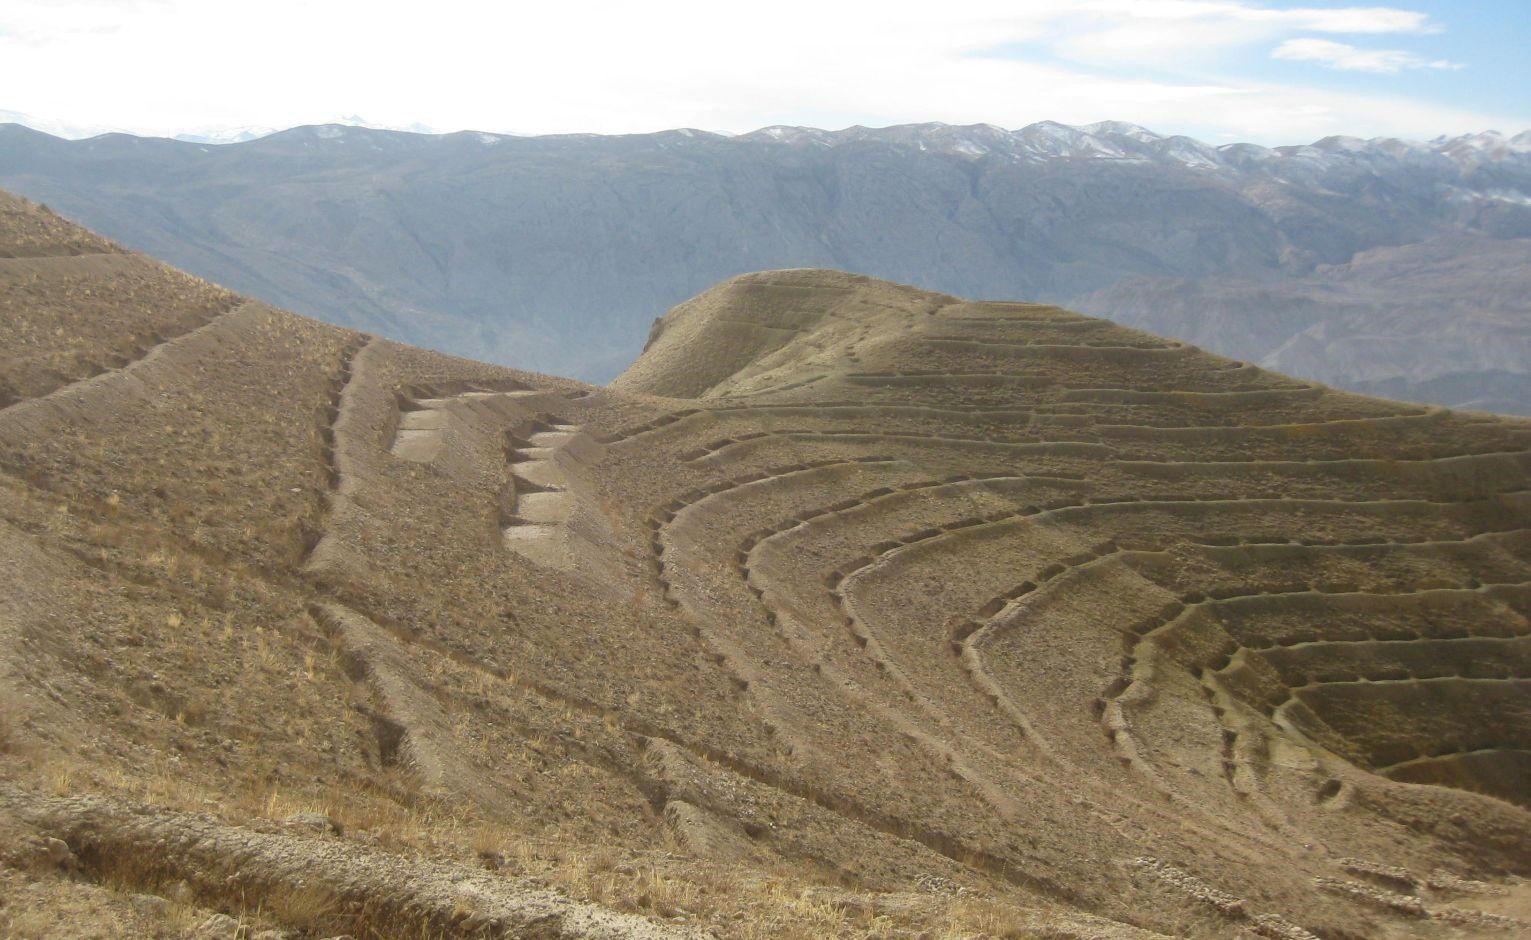 Contour trenches in Afghanistan are one example of the many sustainable land management strategies described in the WOCAT database. Photo: HELVETAS Swiss Intercooperation